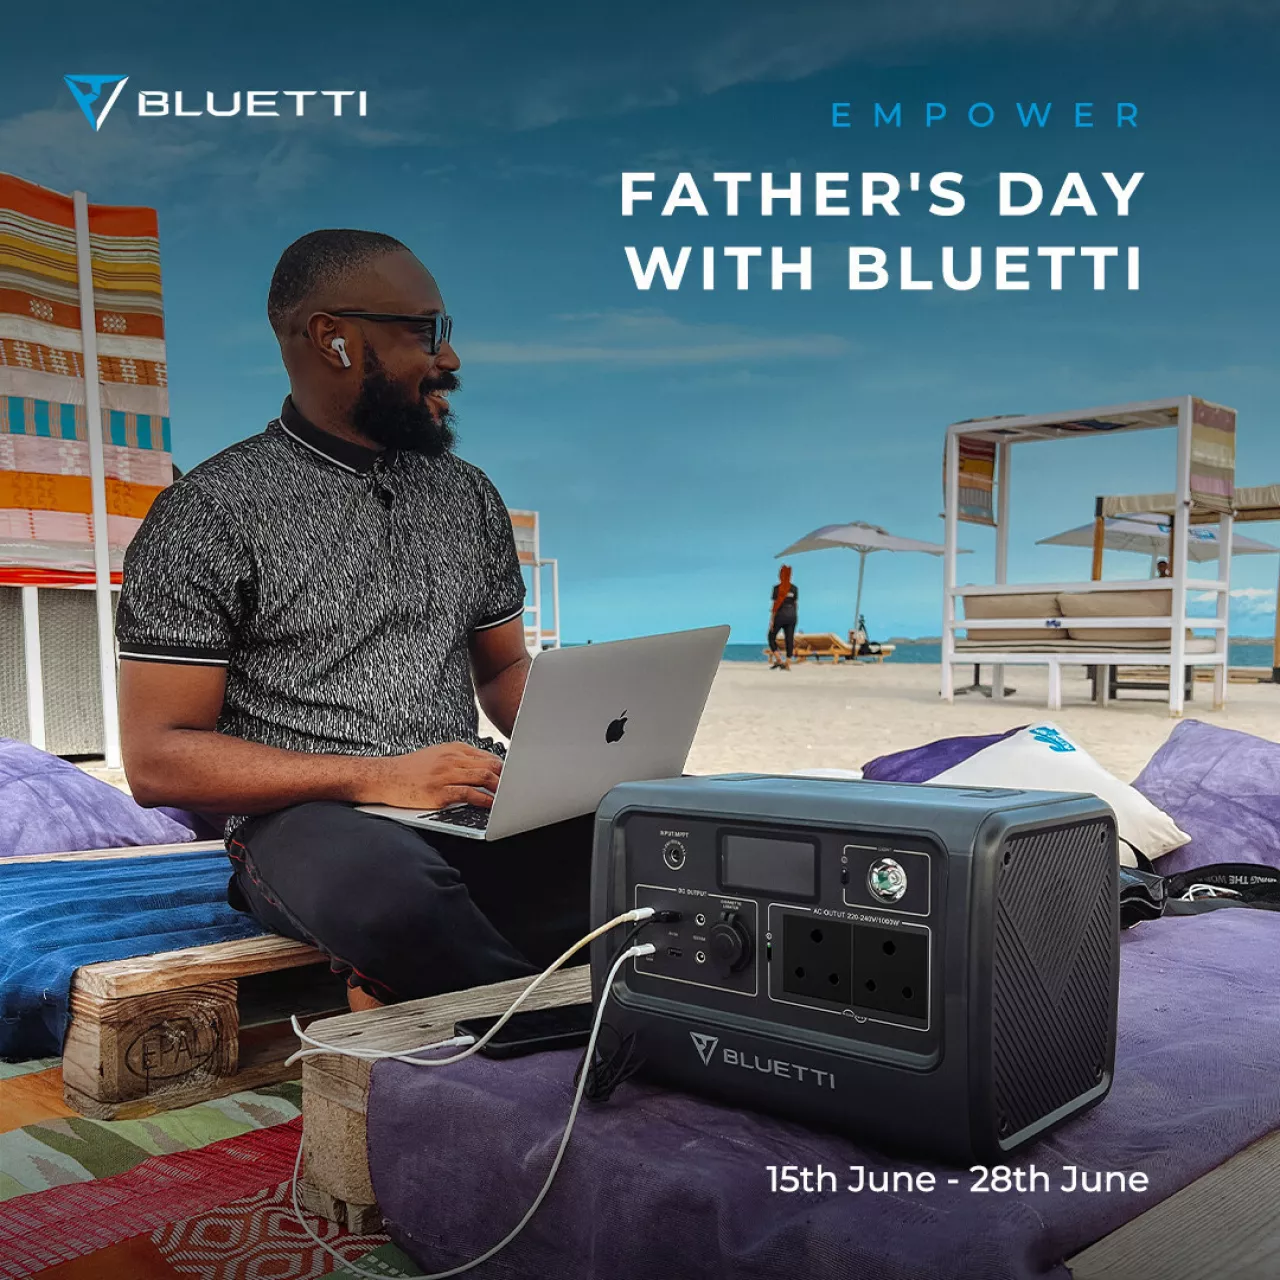 BLUETTI Presents Unbeatable Father's Day Gift Ideas to Empower Dads img#1